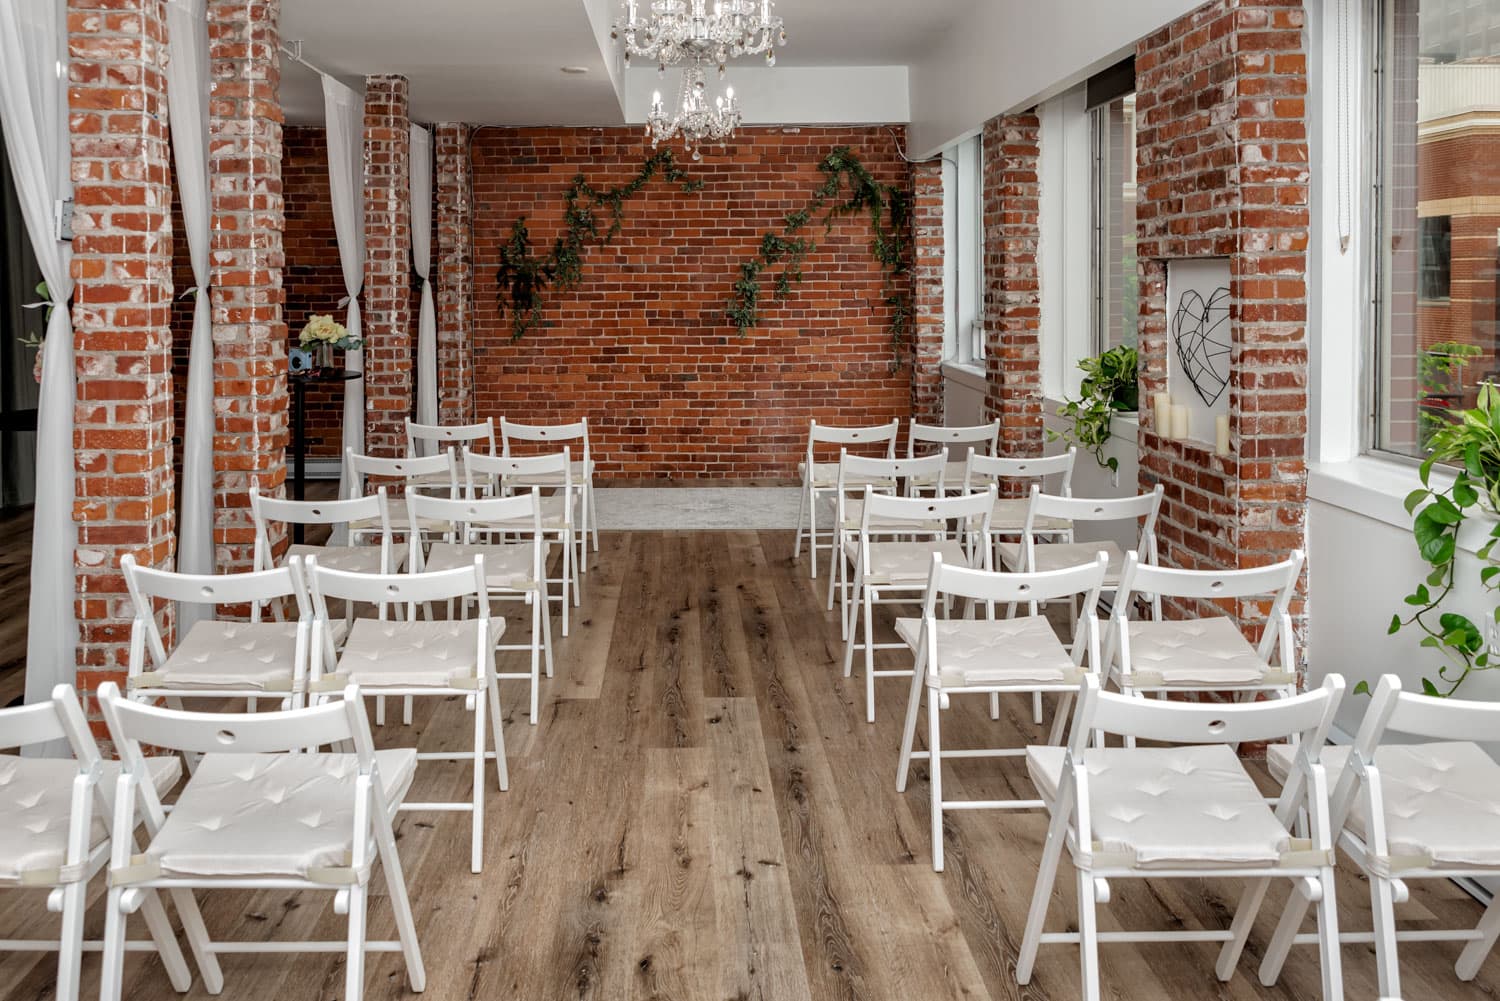 Happily Hitched Halifax is a beautiful urban brick style wedding elopement venue.